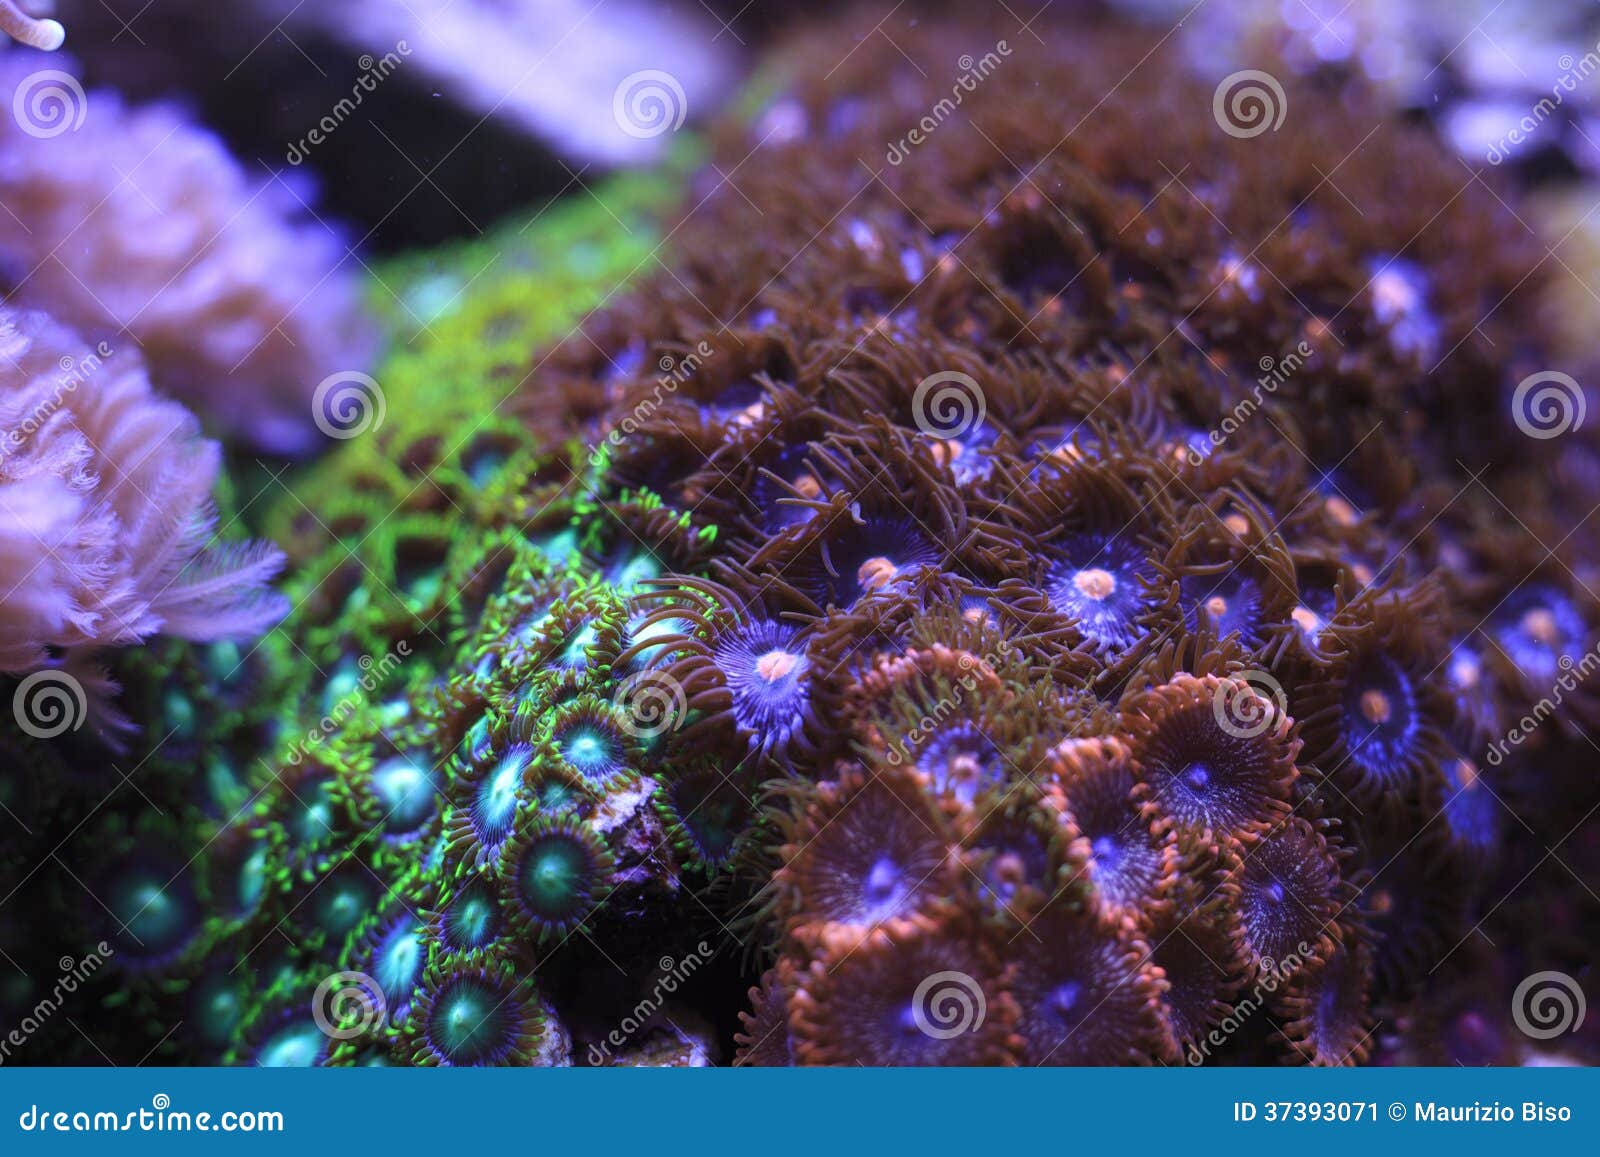 zoanthids for sale